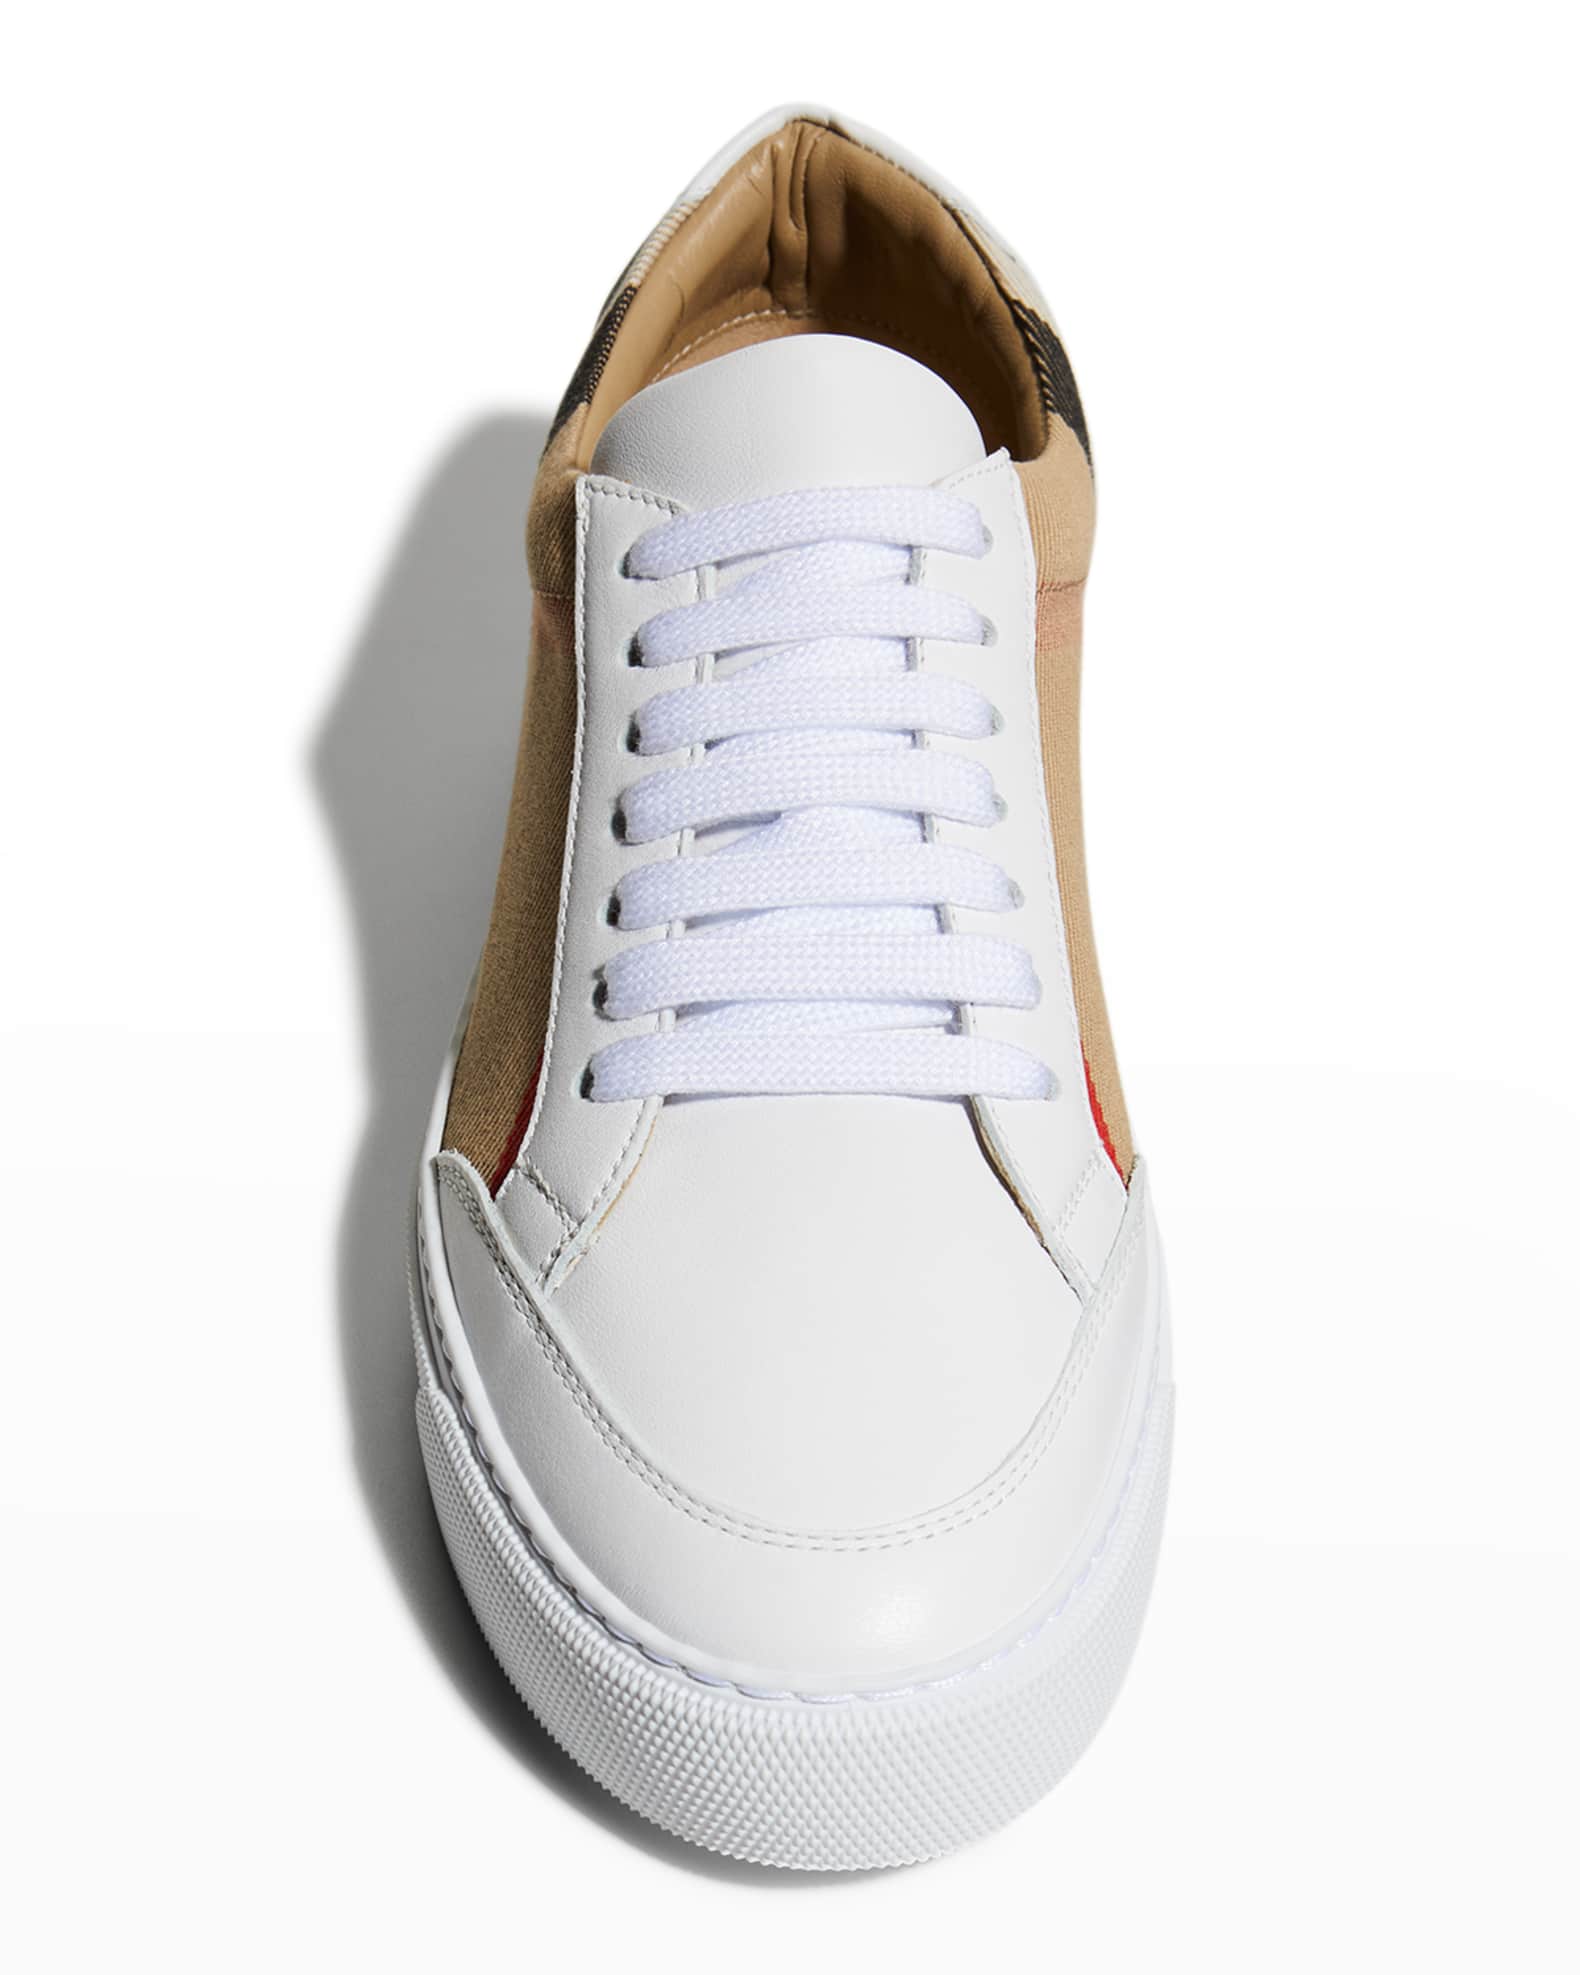 Burberry New Salmond Check Leather Sneakers | Neiman Marcus